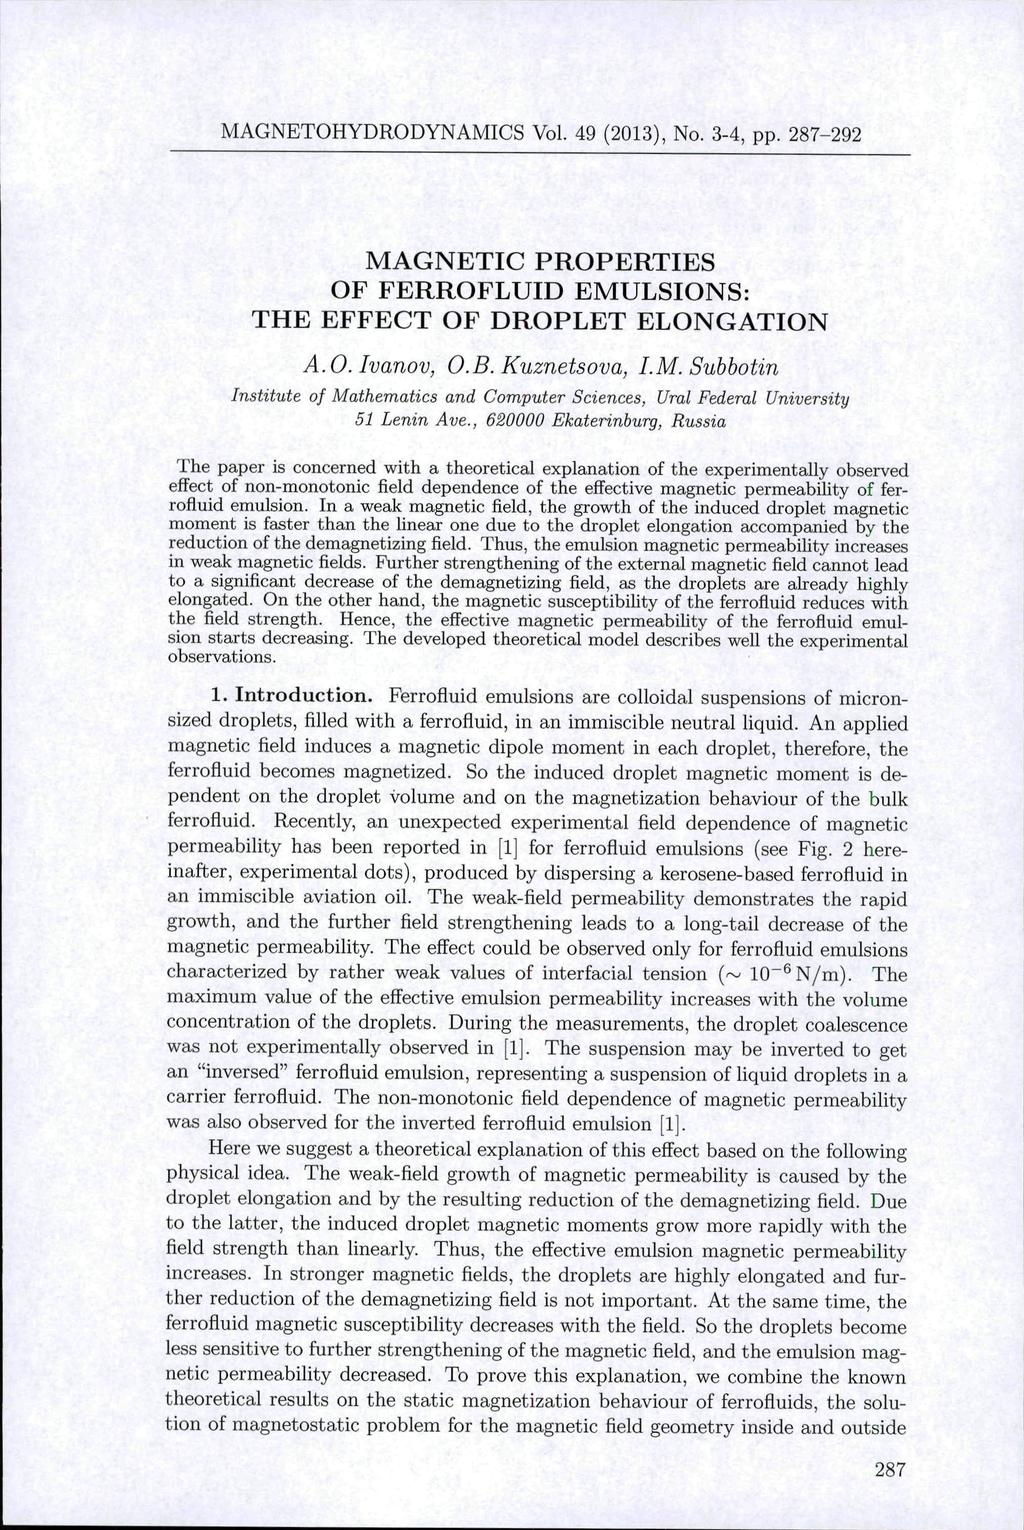 MAGNETOHYDRODYNAMICS Vol. 49 (2013), No. 3-4, pp. 287-292 MAGNETIC PROPERTIES OF FERROFLUID EMULSIONS: THE EFFECT OF DROPLET ELONGATION A.O. Ivaiiov, O.B.Kuznetsova, I.M. Suhhotin Institute of Mathematics and Computer Sciences, Ural Federal University 51 Lenin Ave.